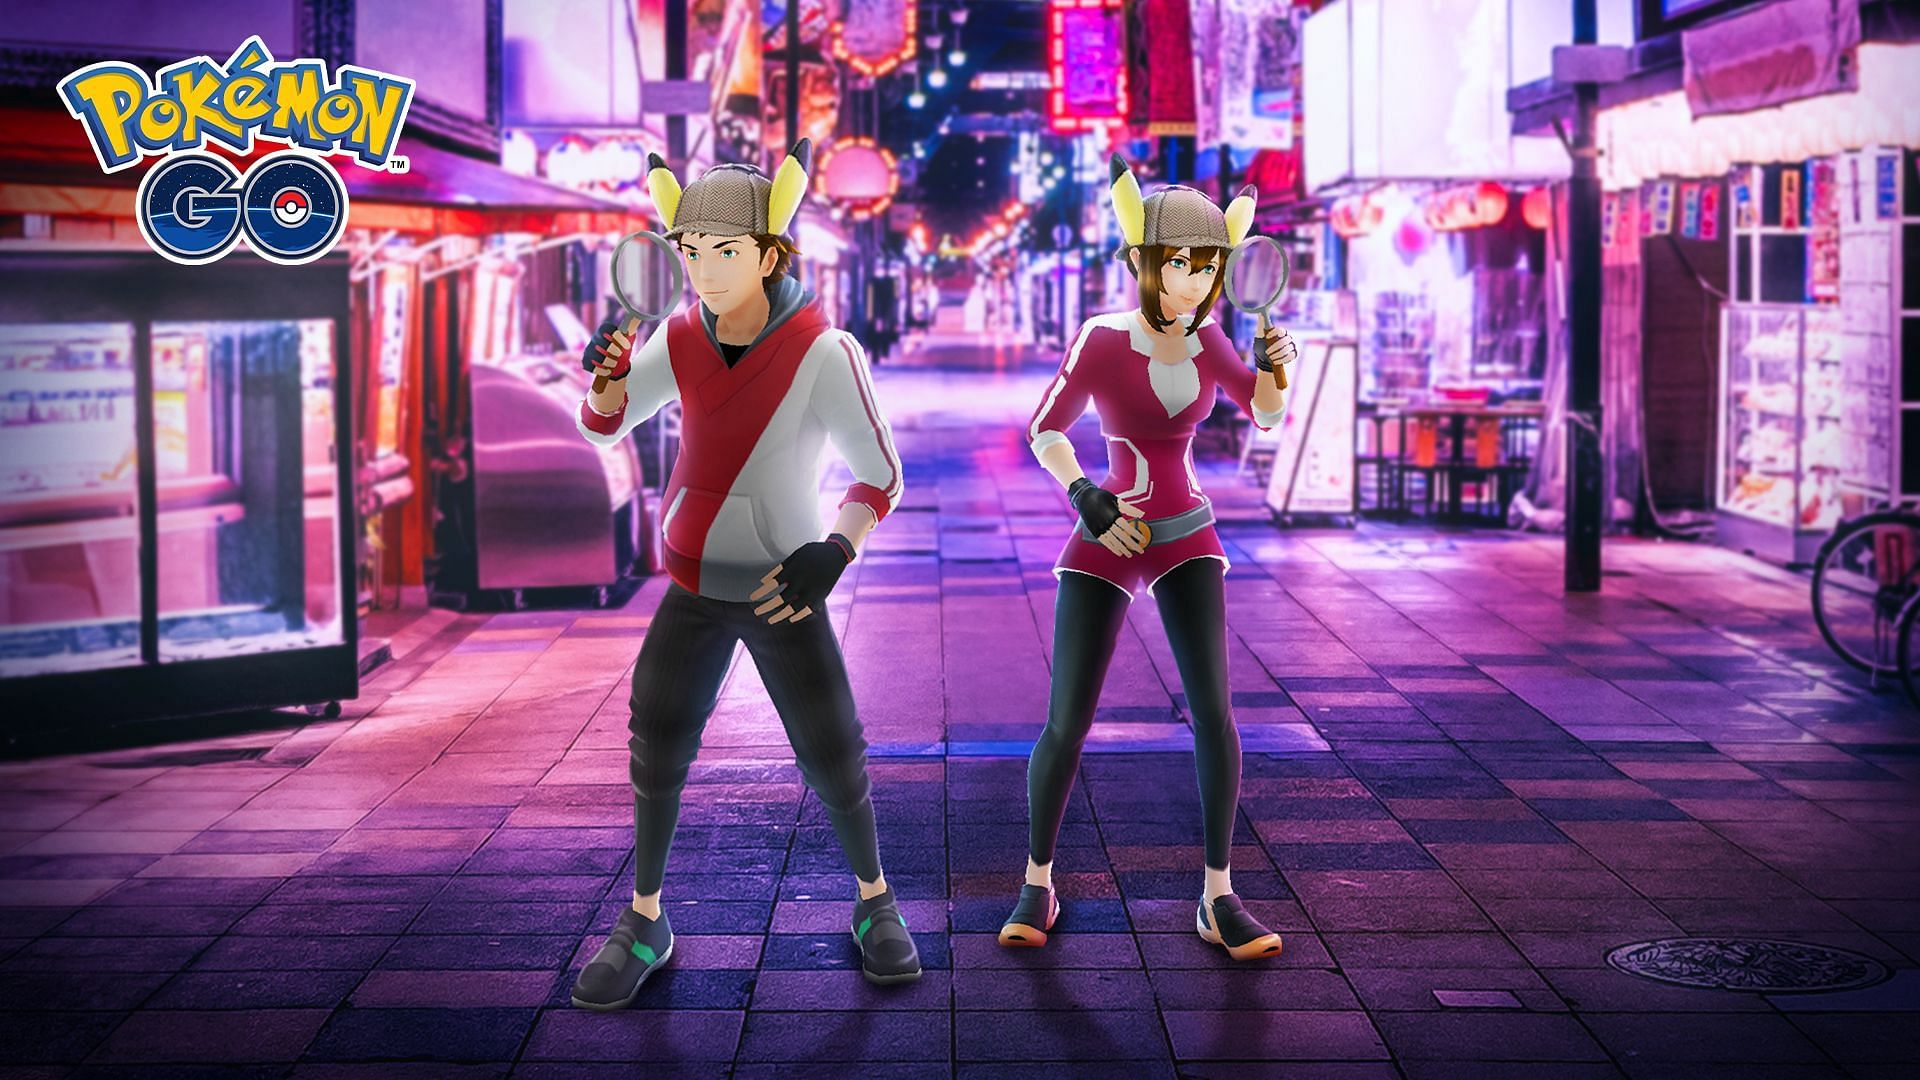 Official artwork for the Detective Pikachu event in Pokemon GO (Image via Niantic)